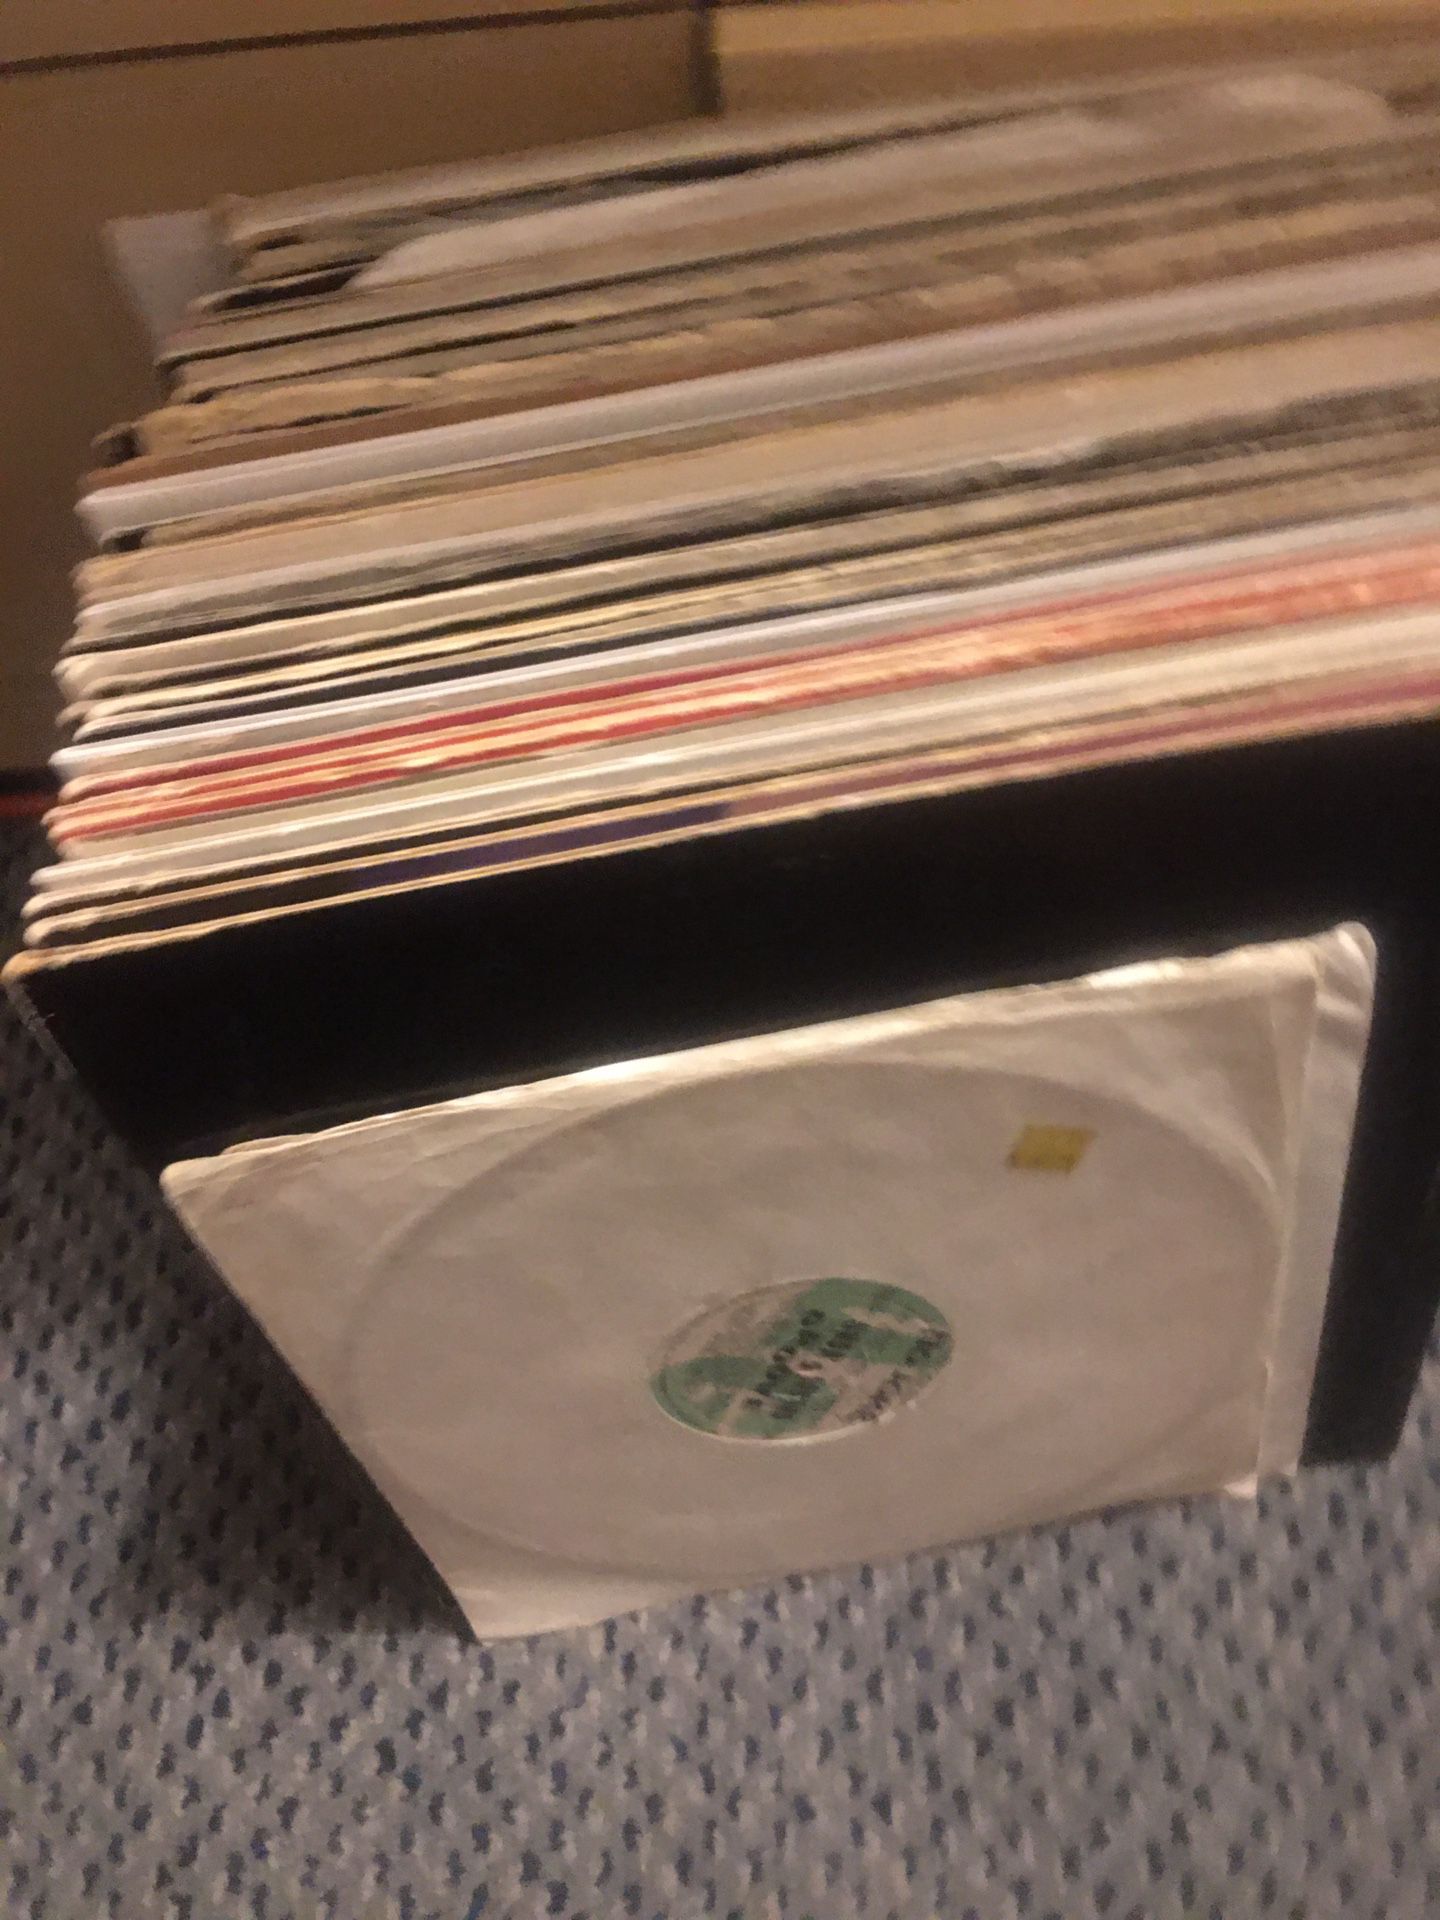 House records for sale $100